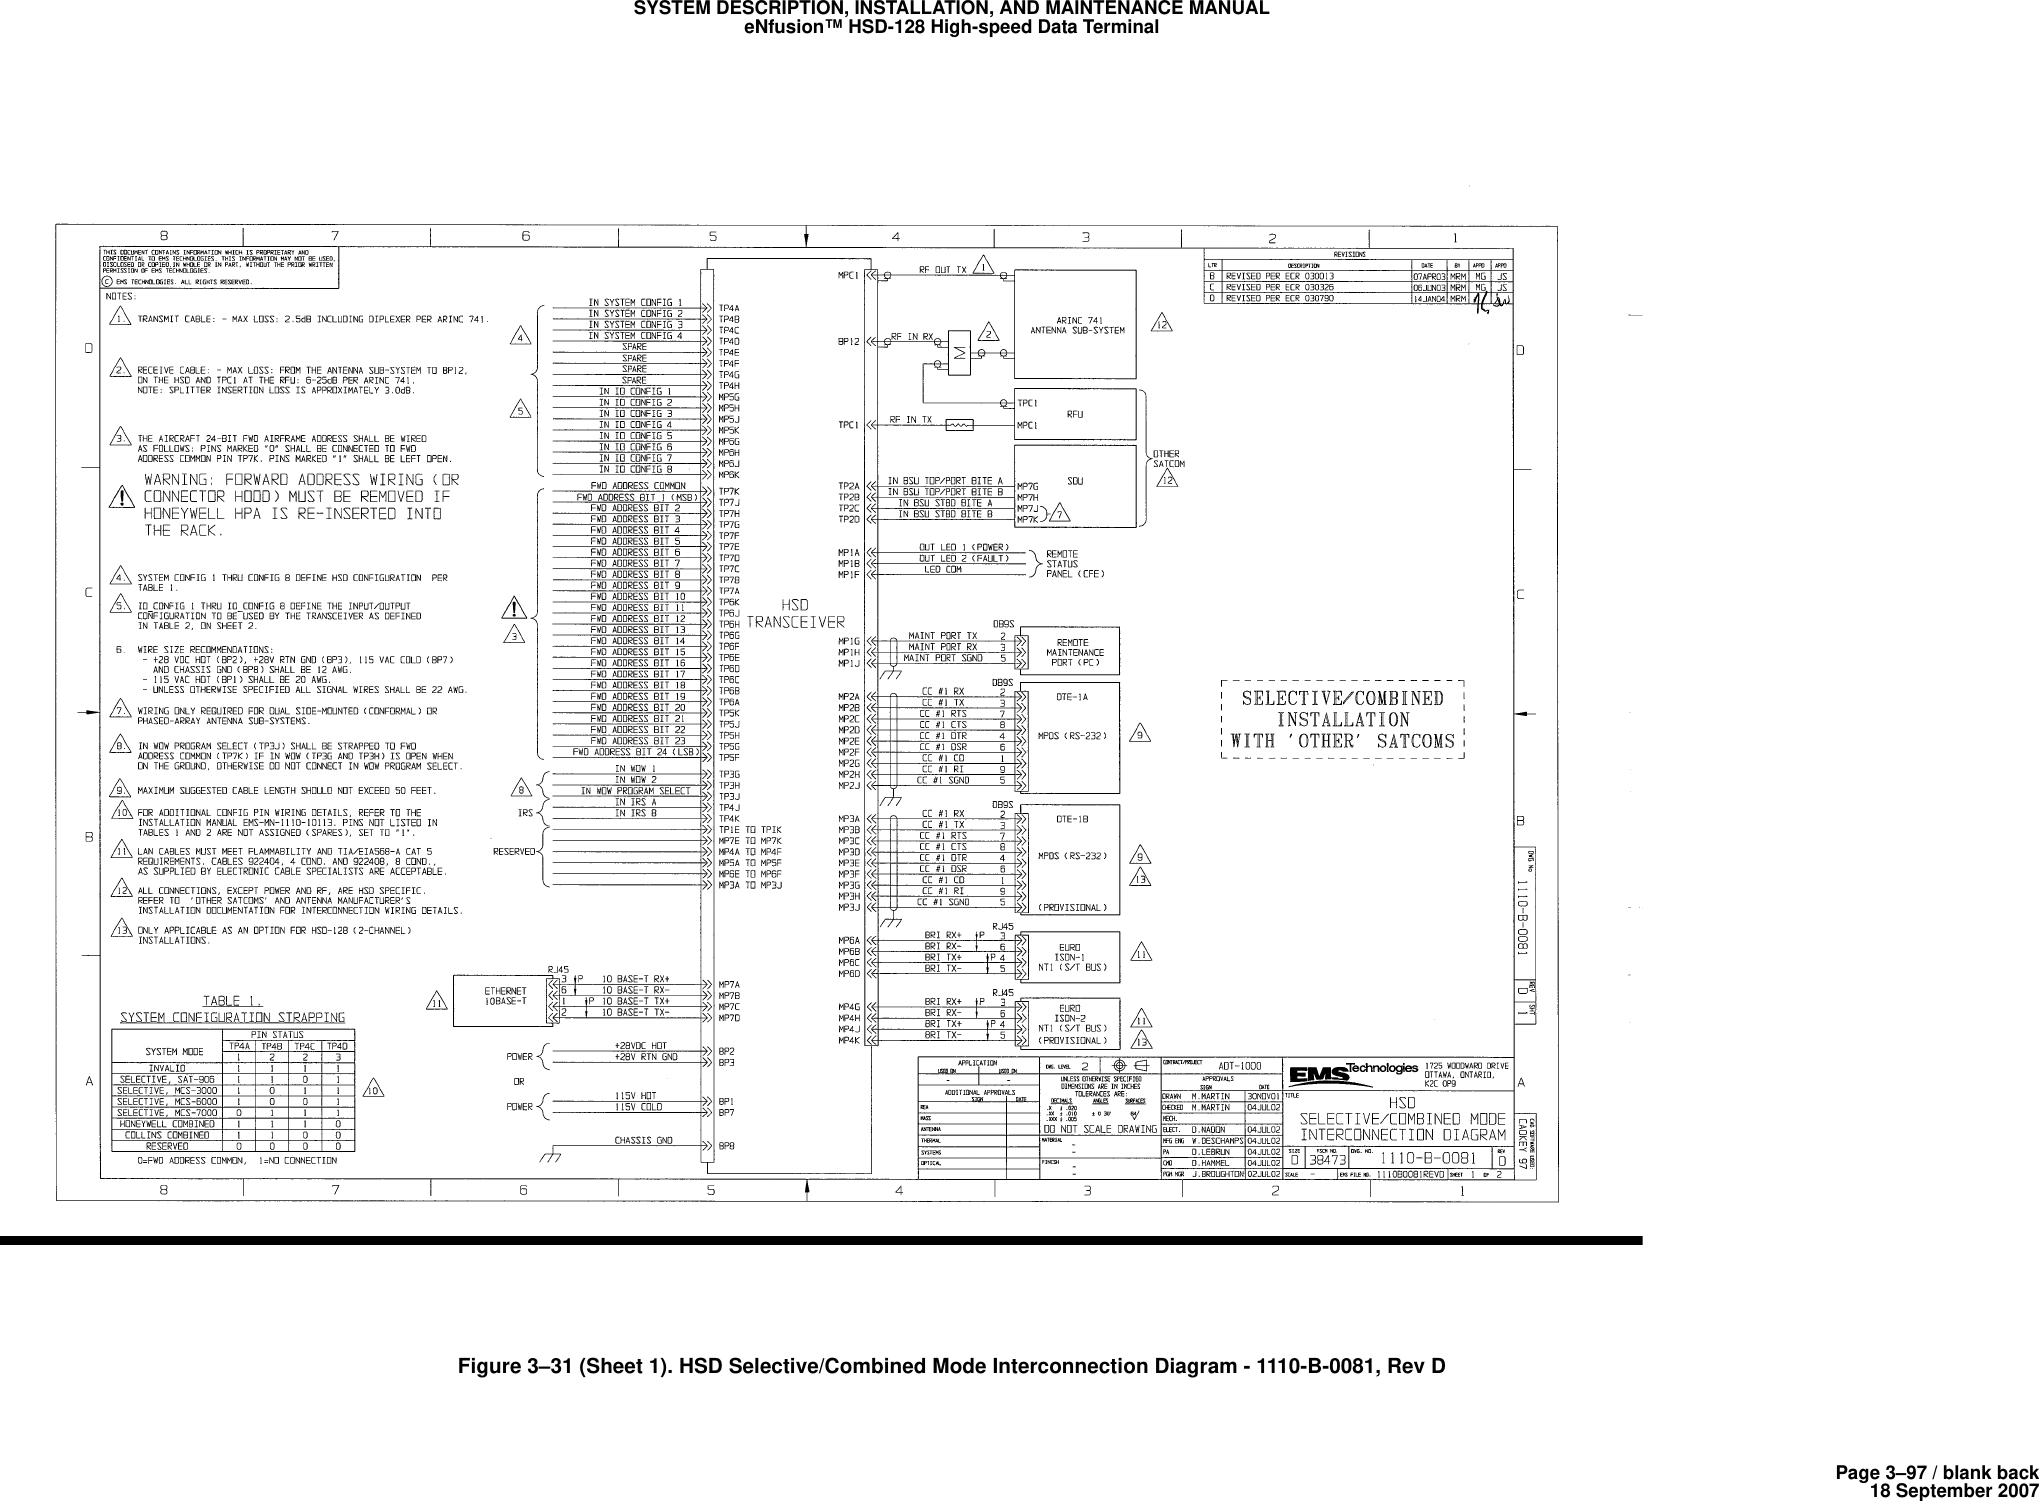 Page 3–97 / blank back18 September 2007SYSTEM DESCRIPTION, INSTALLATION, AND MAINTENANCE MANUALeNfusion™ HSD-128 High-speed Data TerminalFigure 3–31 (Sheet 1). HSD Selective/Combined Mode Interconnection Diagram - 1110-B-0081, Rev D